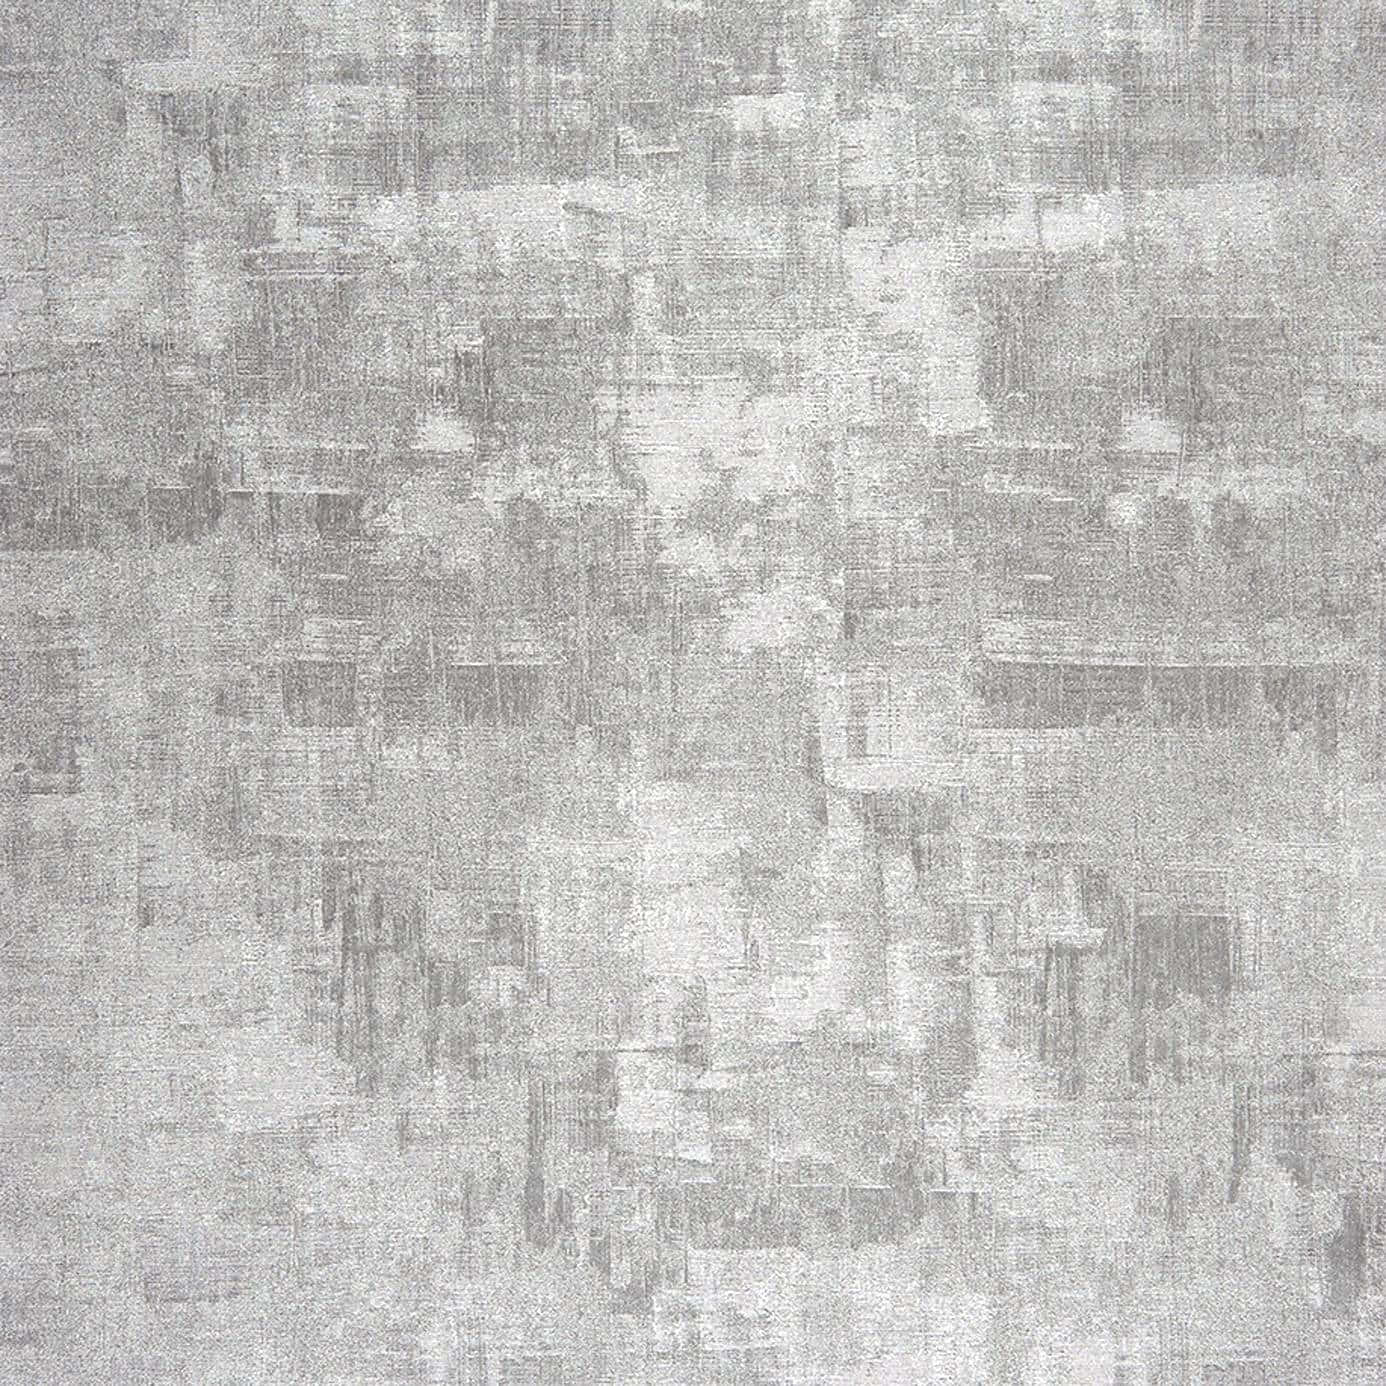 A Grey And White Textured Wall Covering